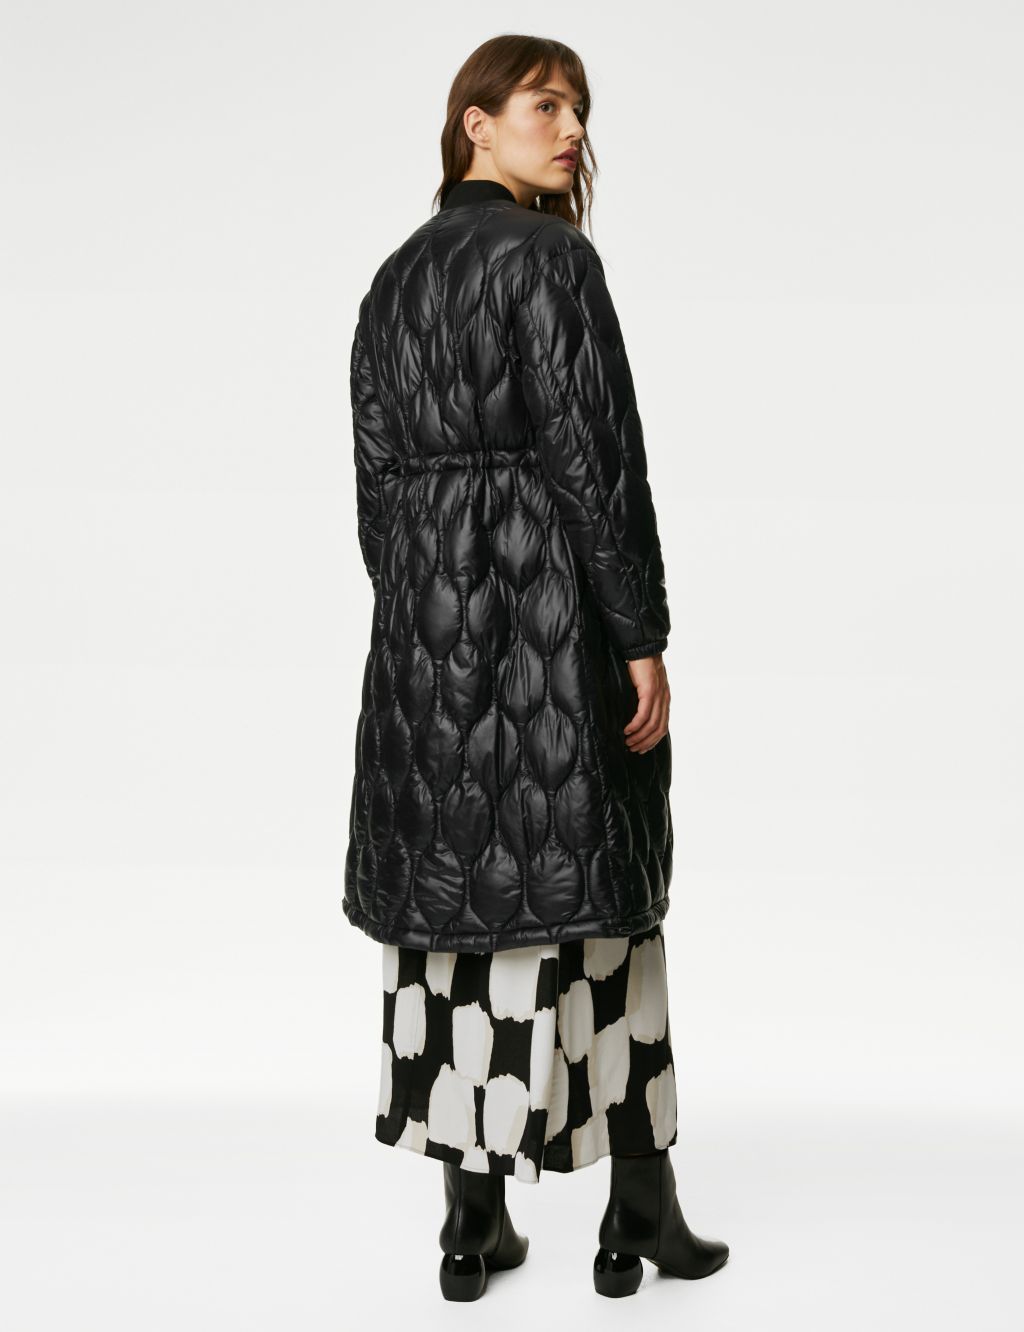 Stormwear™ Quilted Coat image 5